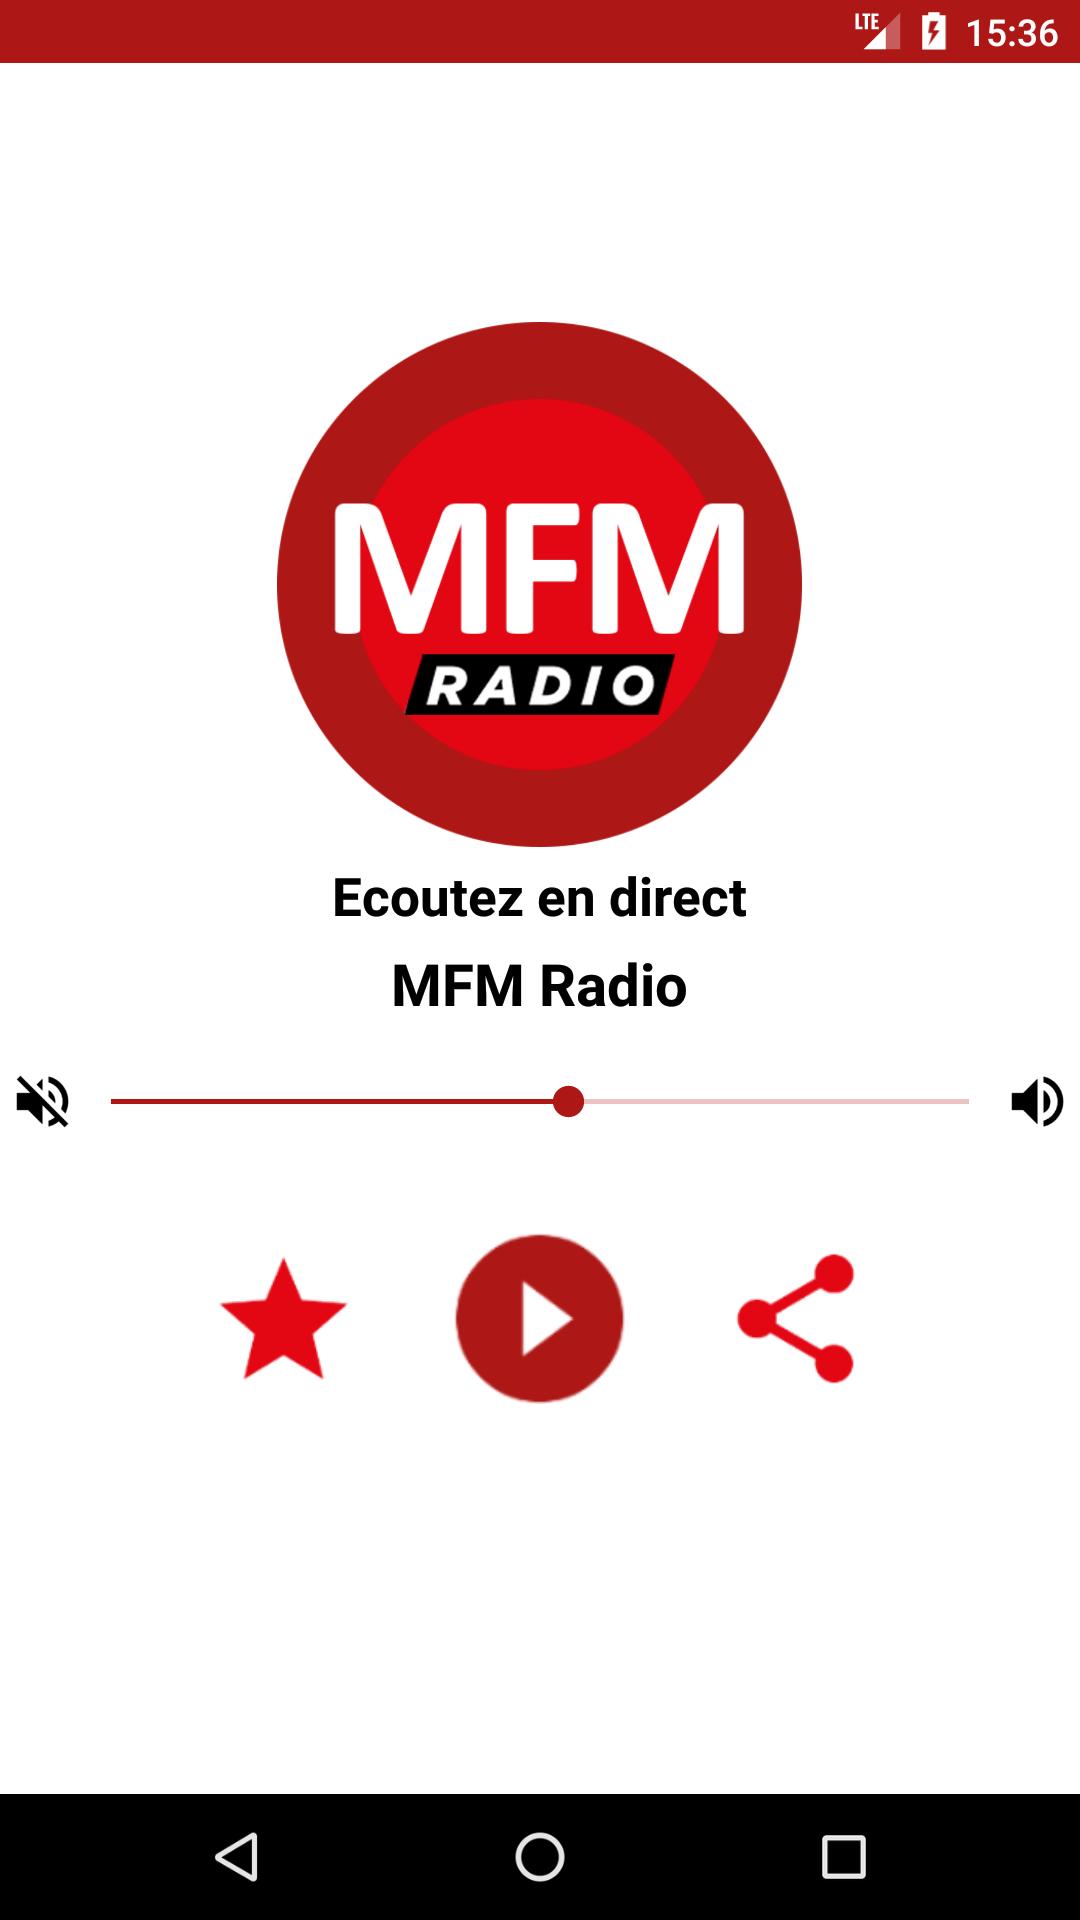 MFM Radio for Android - APK Download